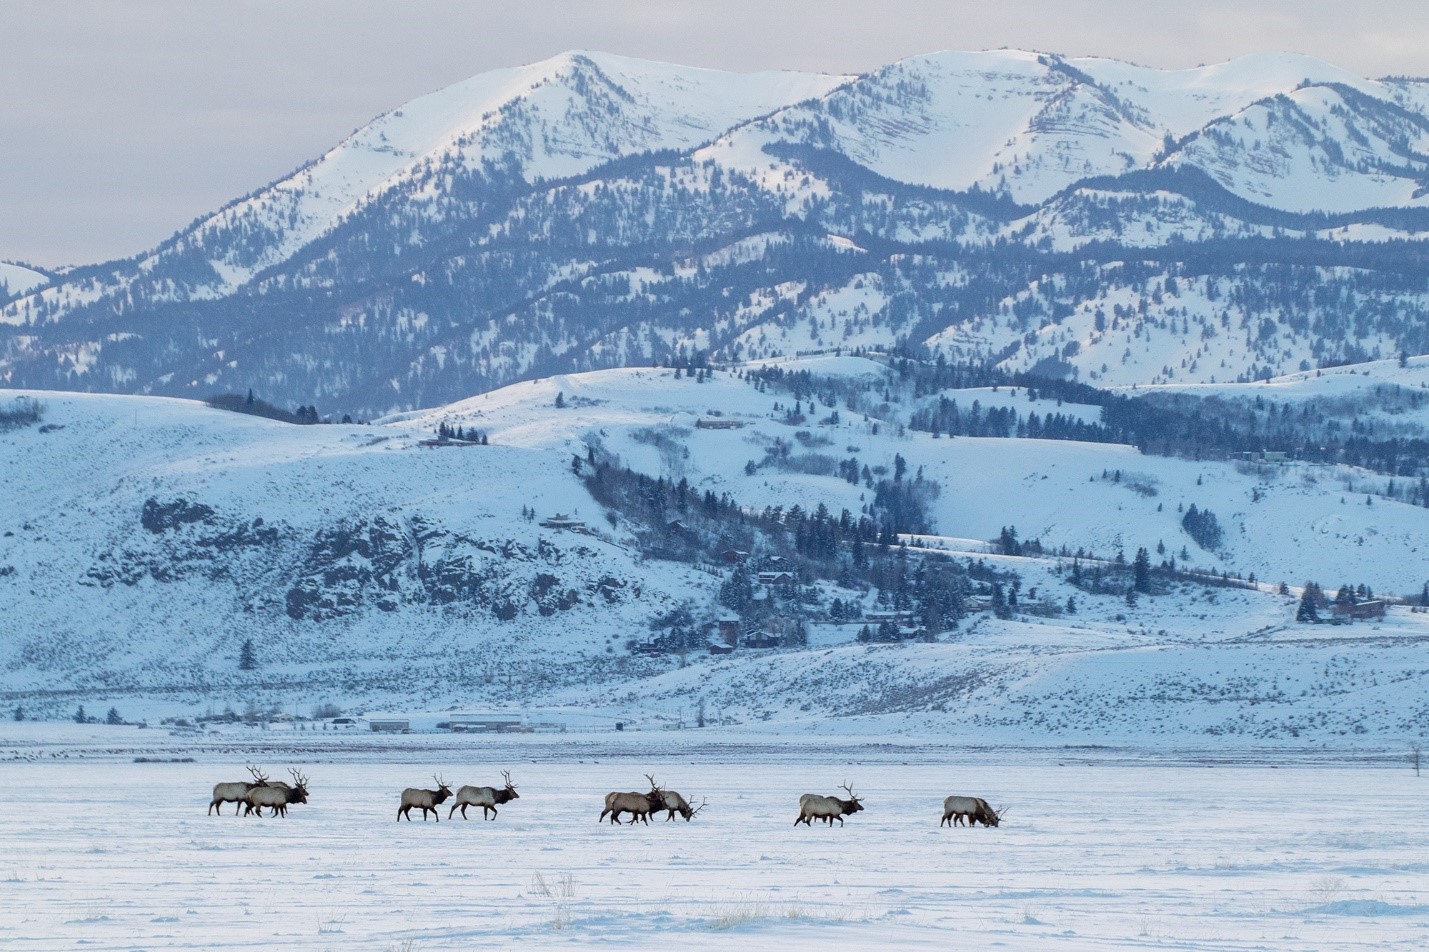 Elk walking through snow-covered terrain with snow-capped mountains in the background.